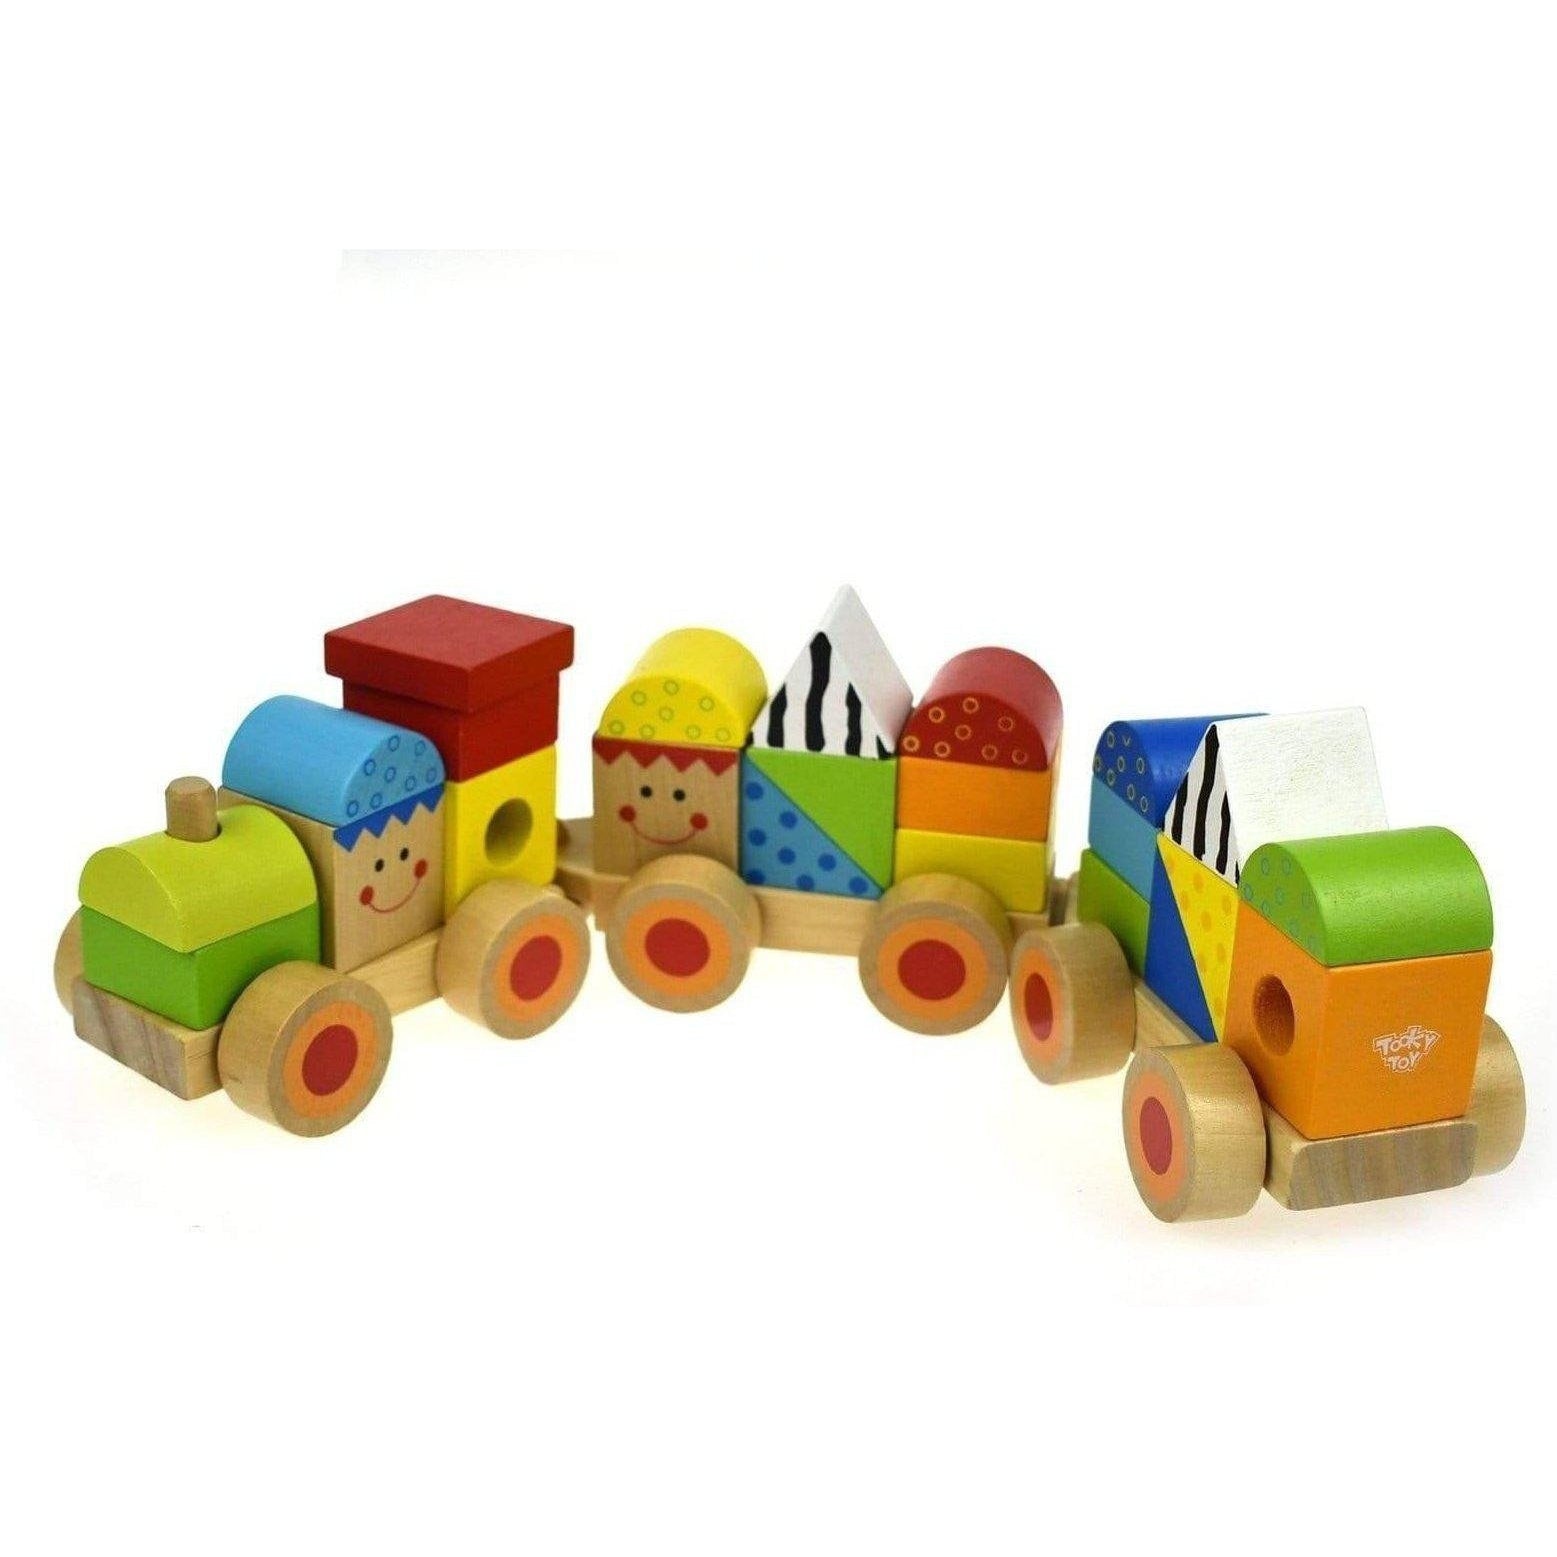 Kids Wooden Stacking Train Toy